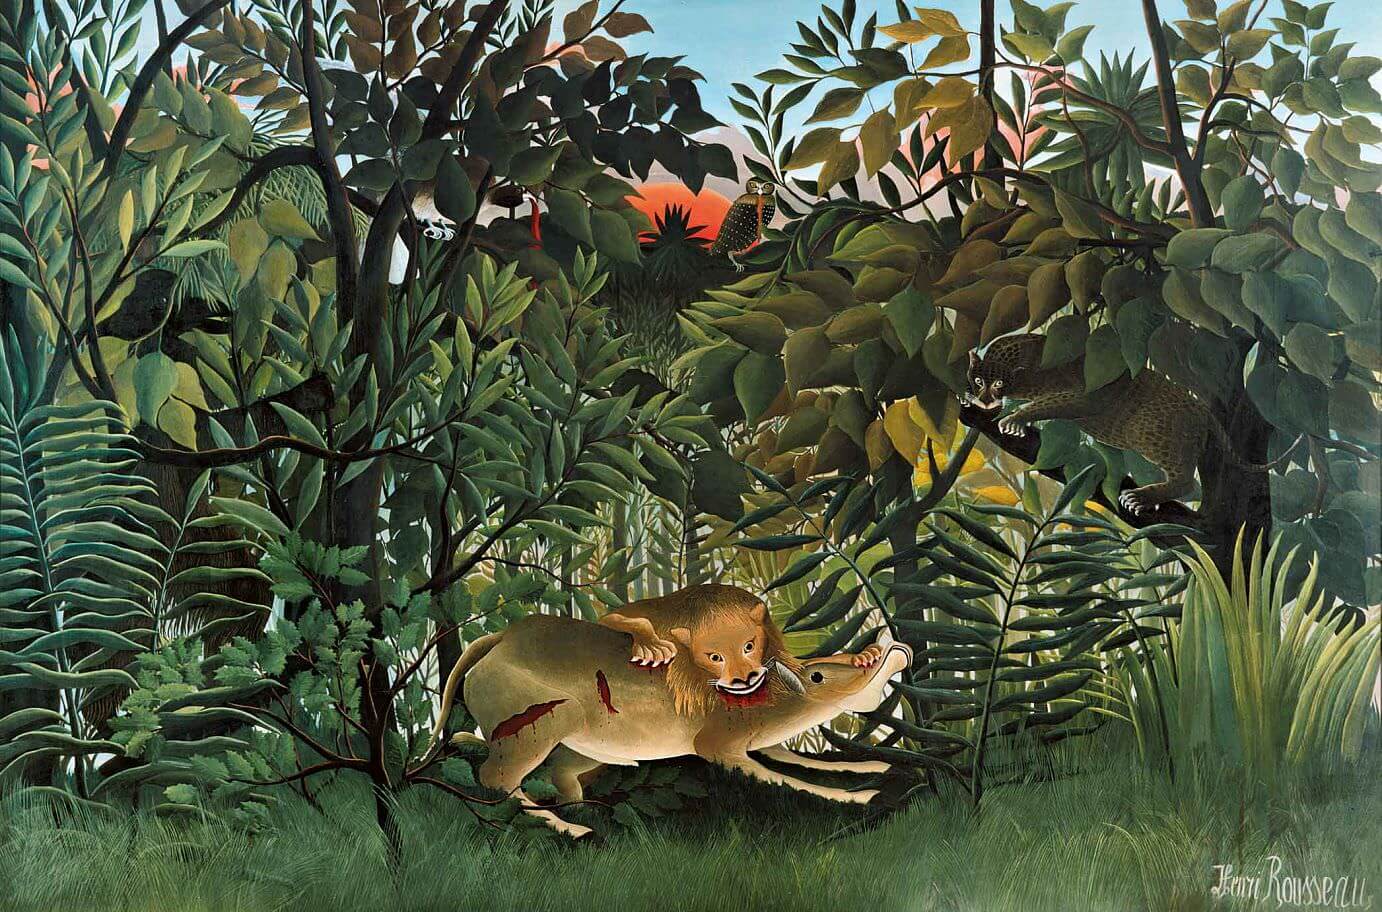 The Hungry Lion Throws Itself on the Antelope, 1905 by Henri Rousseau